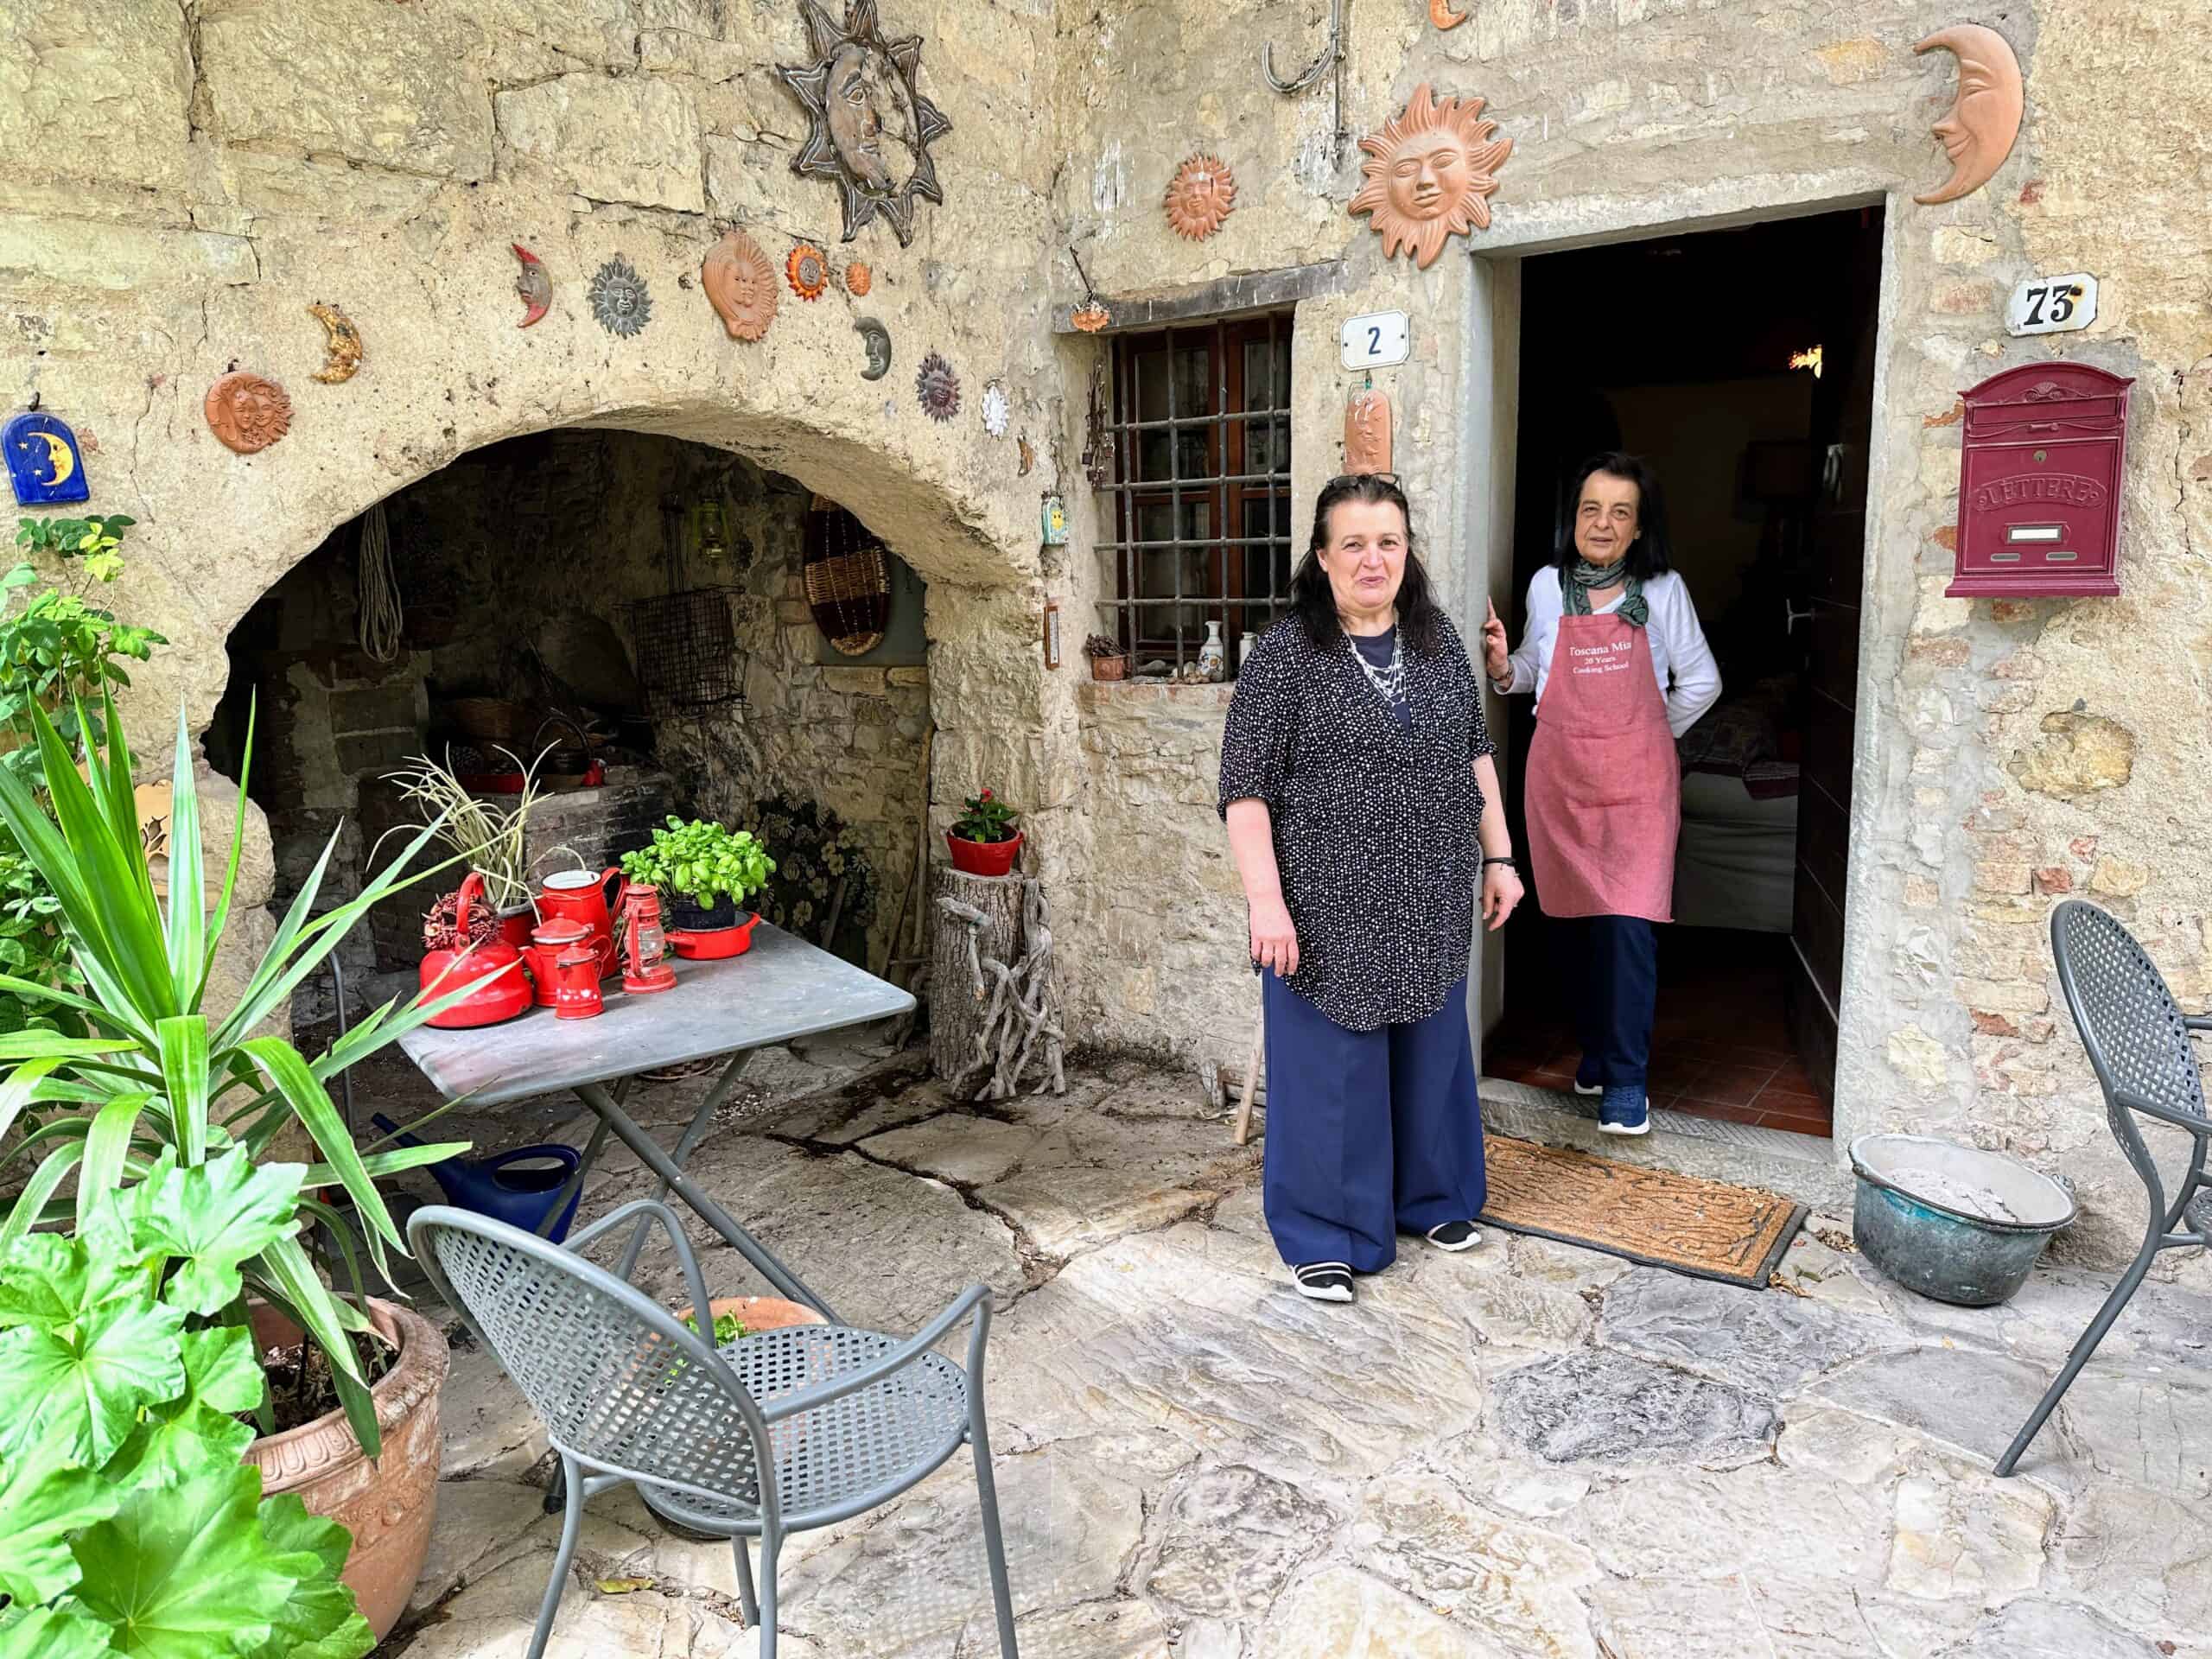 Two women stand in front of entrance to home. Building is made of stone, there are decorations on the walls outside. Plants and chairs and table next to them on front terrace.